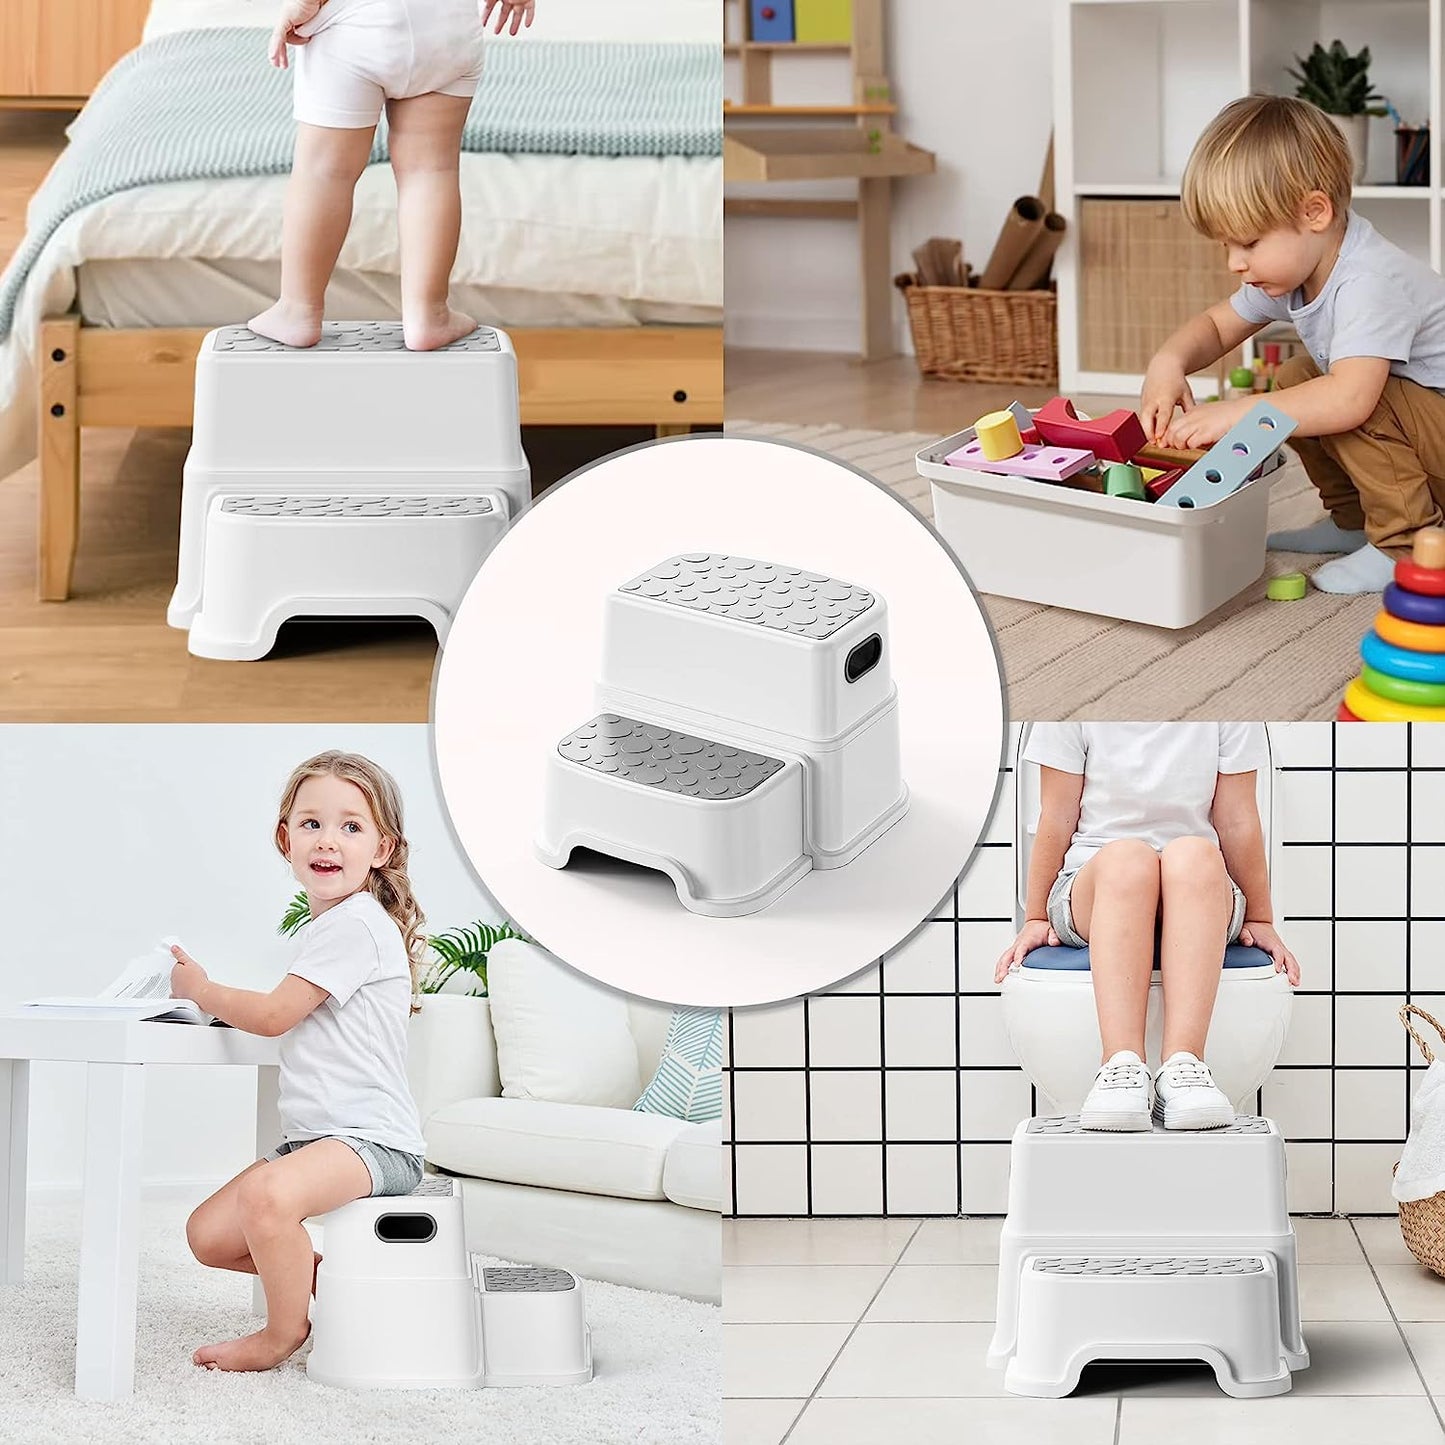 3 in 1 Step Stool for Kids - Toddler Sink Step Up Stool for Kitchen - Bathroom Safety Bottom as Potty Training Stool -Double Step Stool for Kitchen,Bathroom - Eco-Friendly